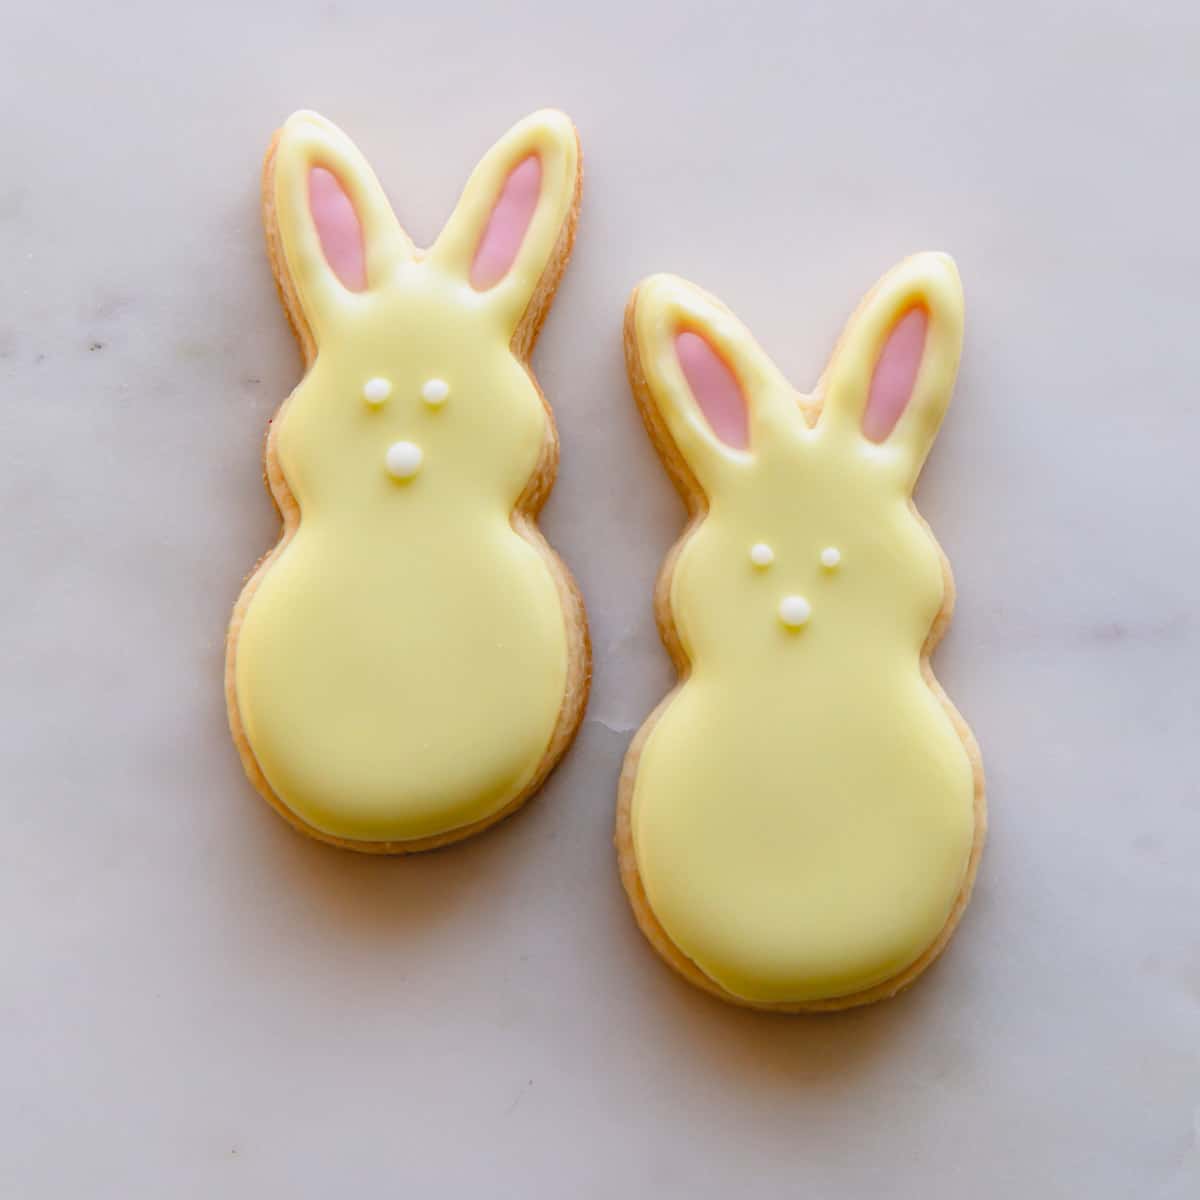 Two yellow Easter bunny sugar cookies with pink ears and white eyes and noses.